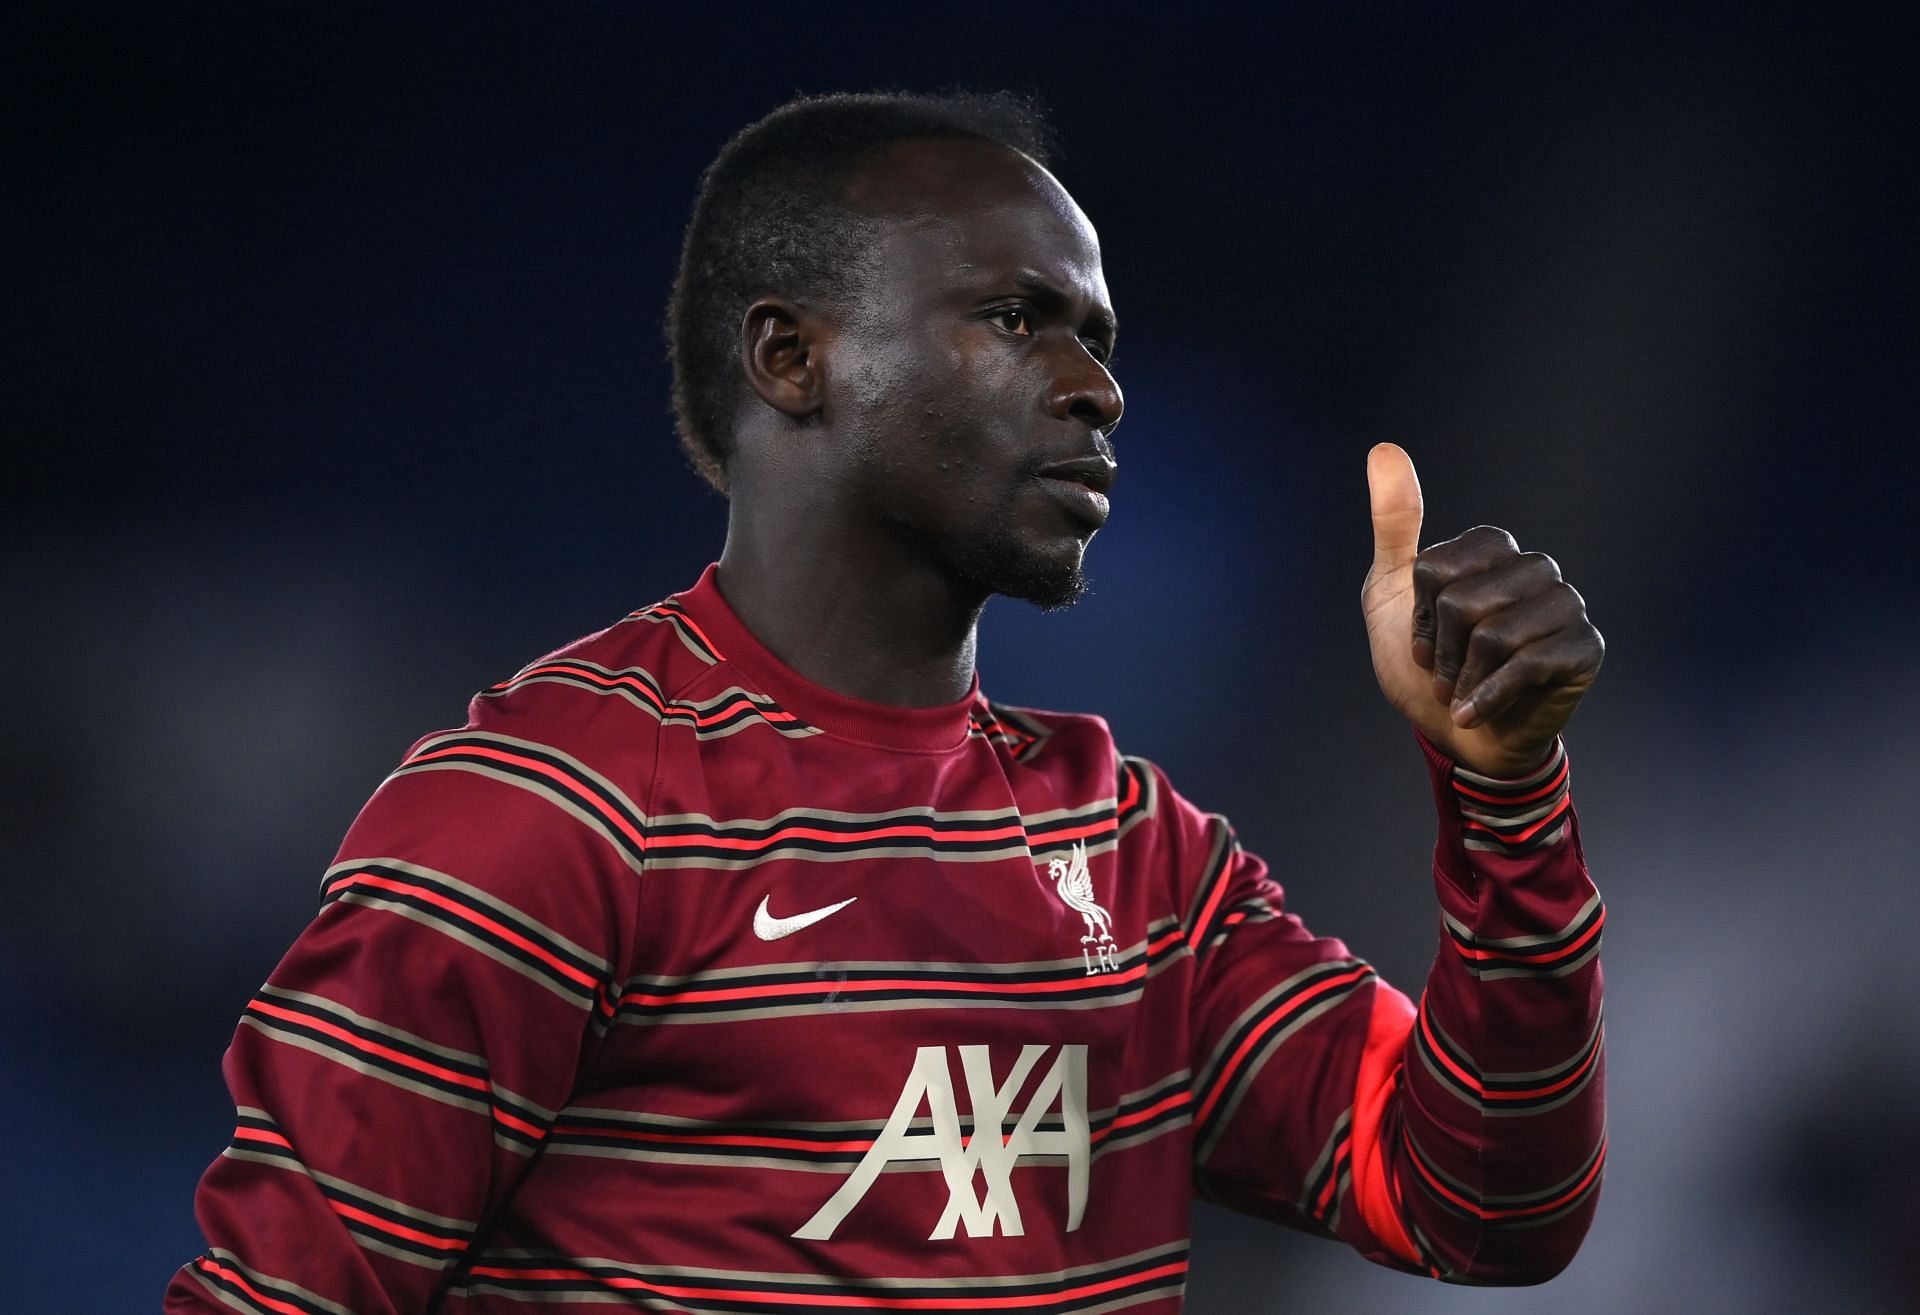 Sadio Mane is a key player for the Reds.